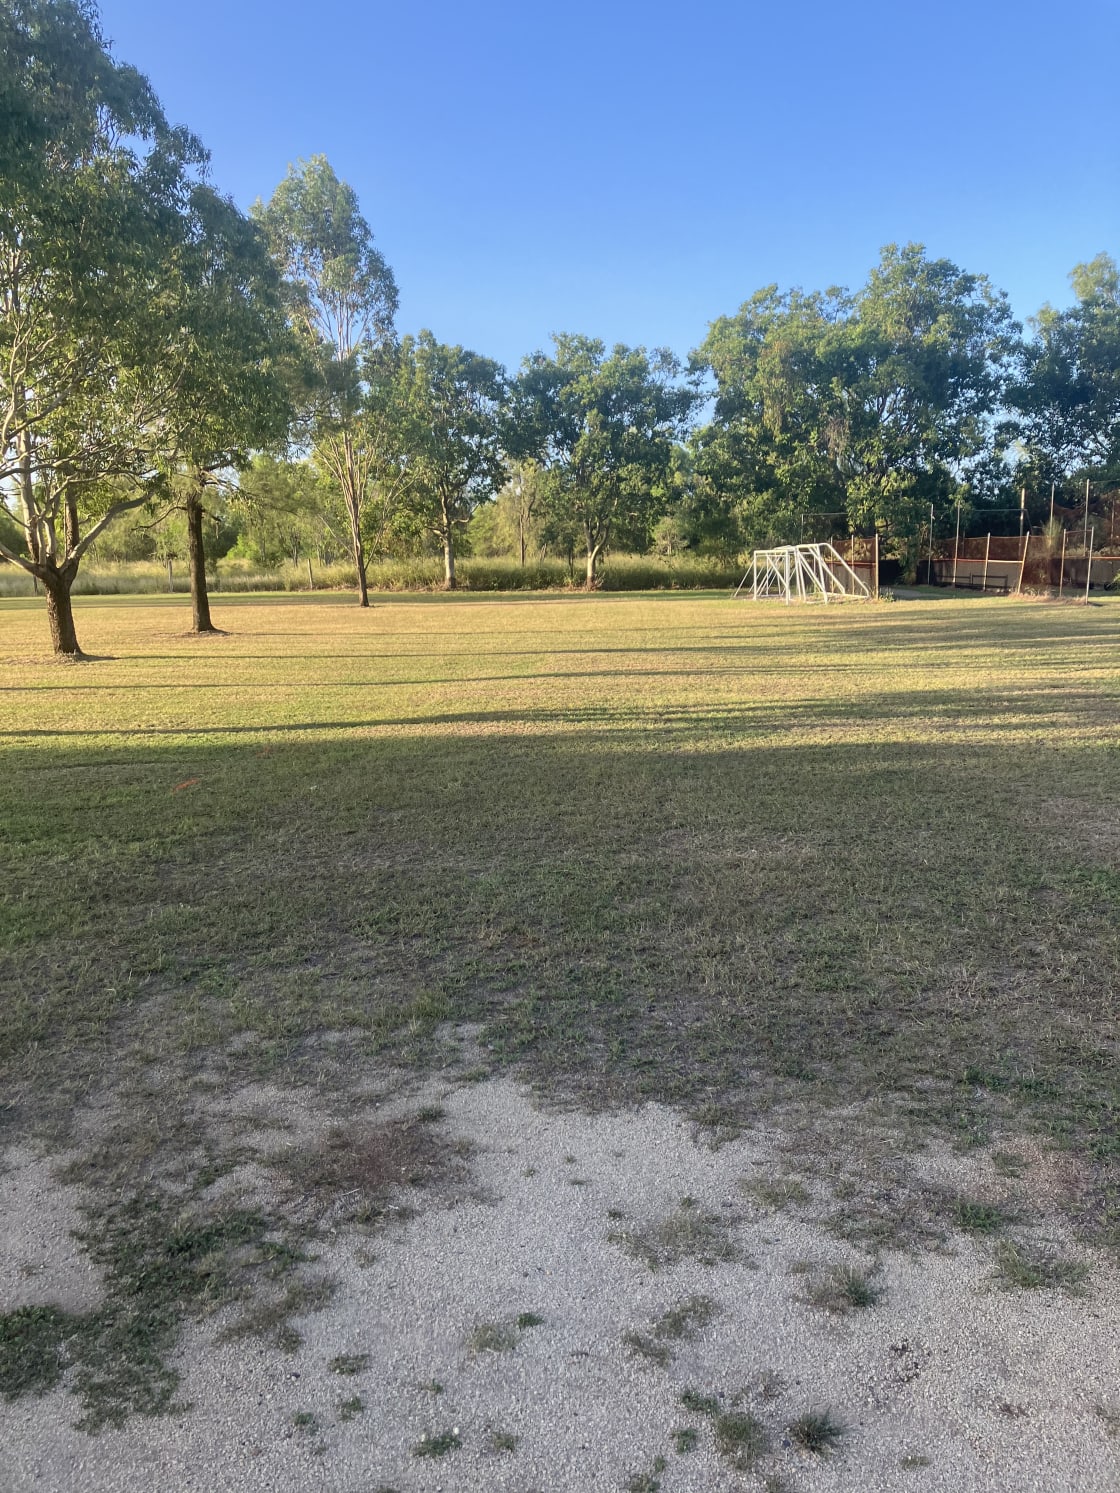 Gracemere Sports Club